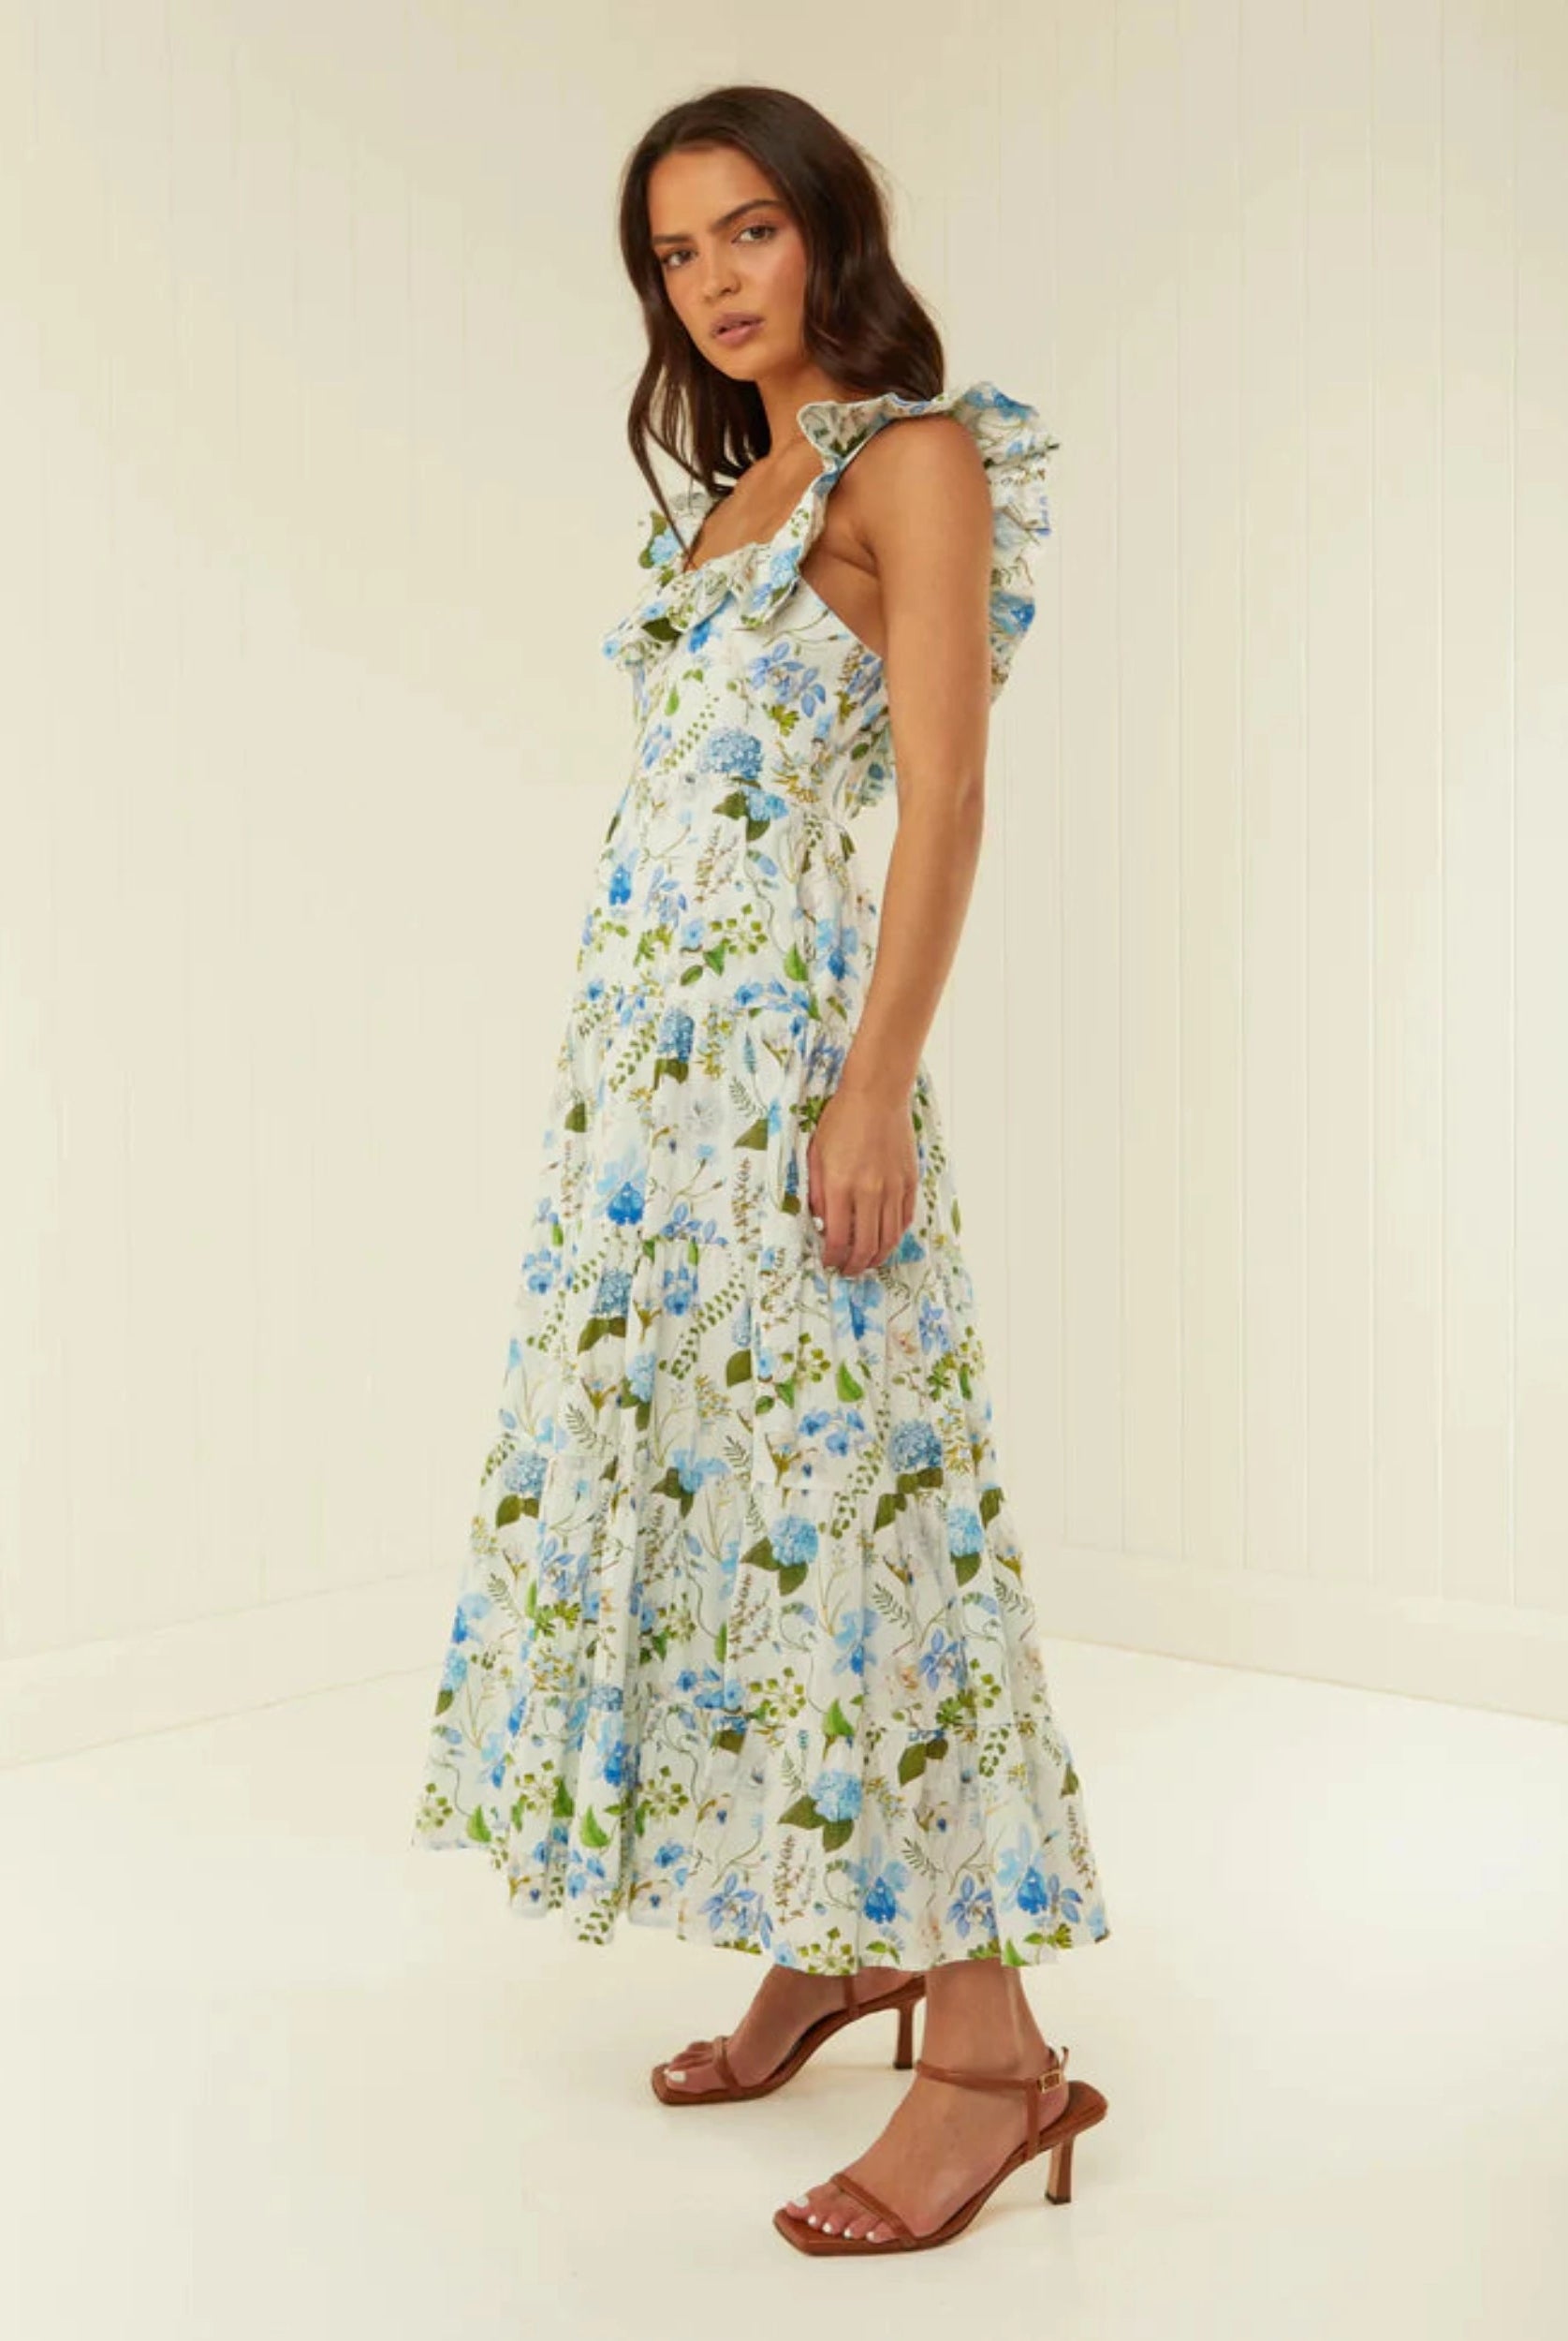 Floral print leon dress with ruffles at neckline